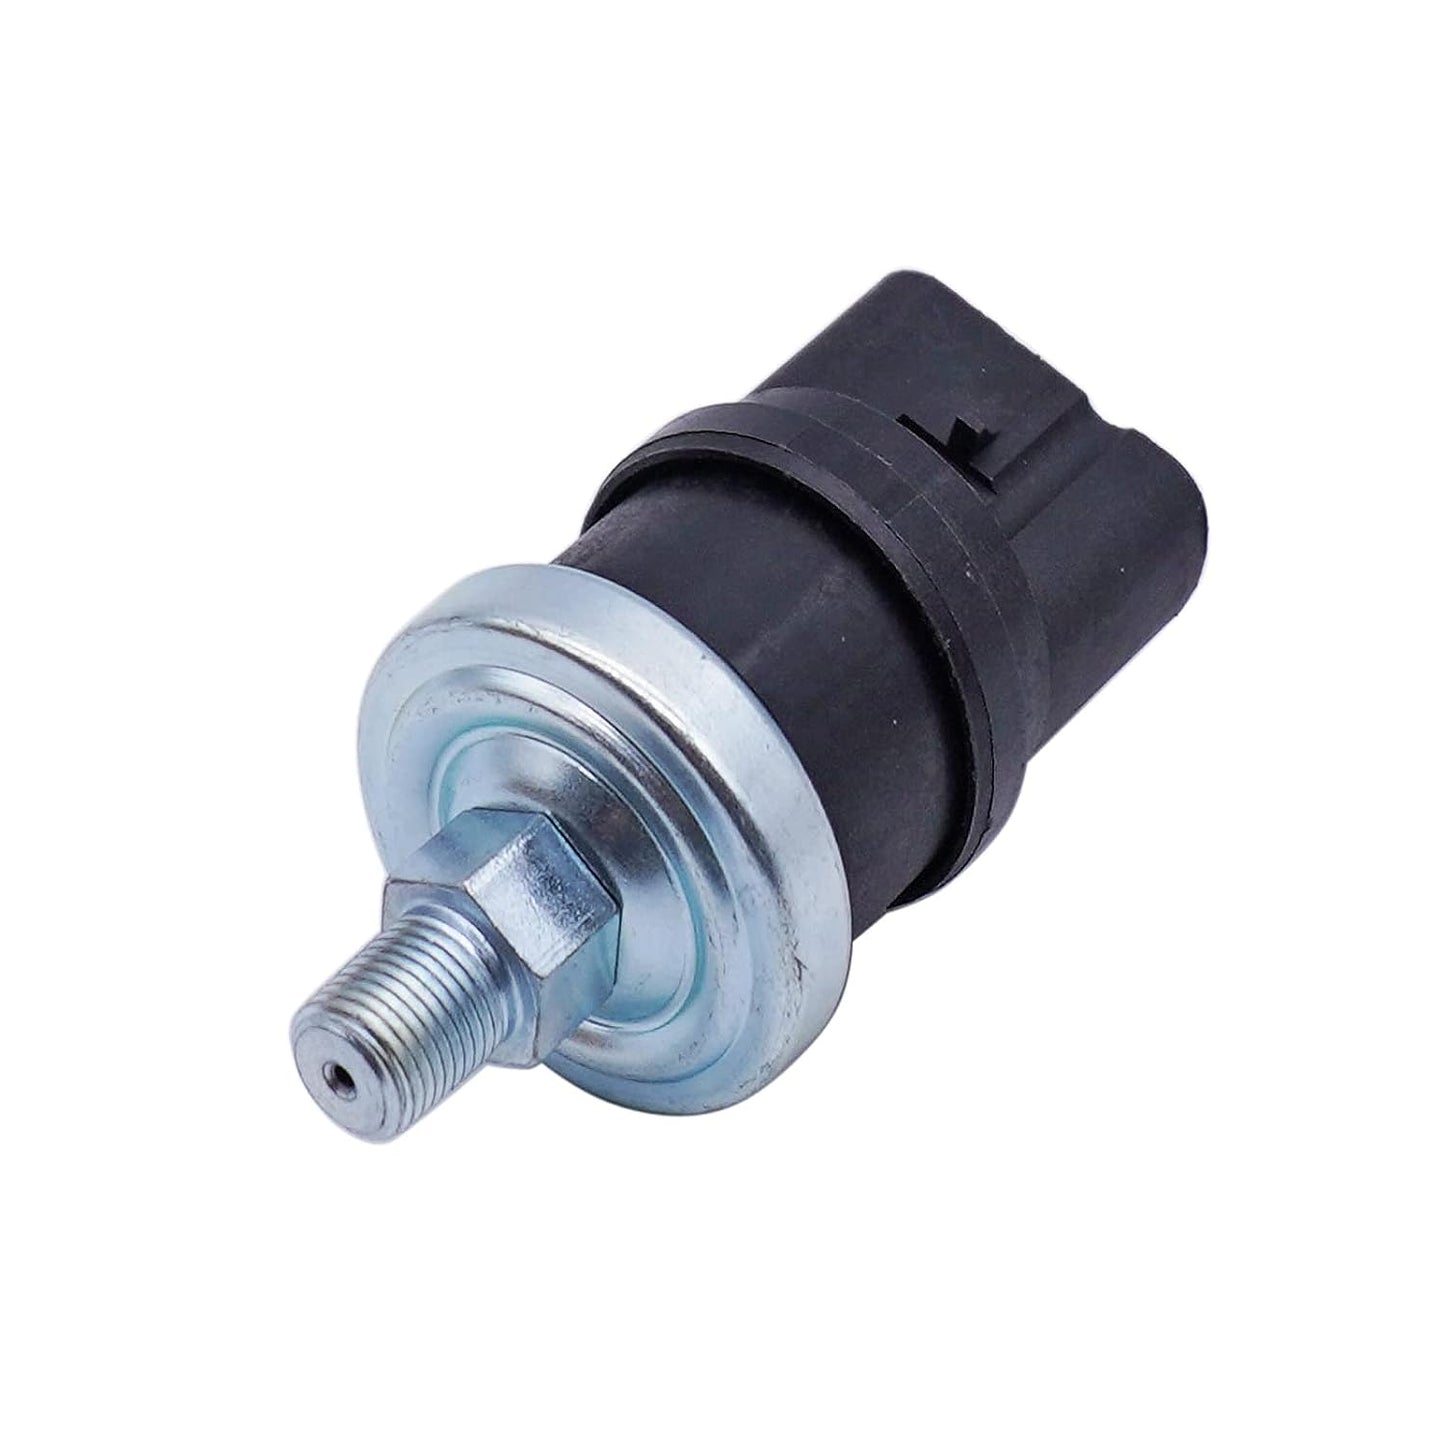 6670705 Hydraulic Oil Pressure Switch Compatible With Bobcat Skid Steer 453 463 553 653